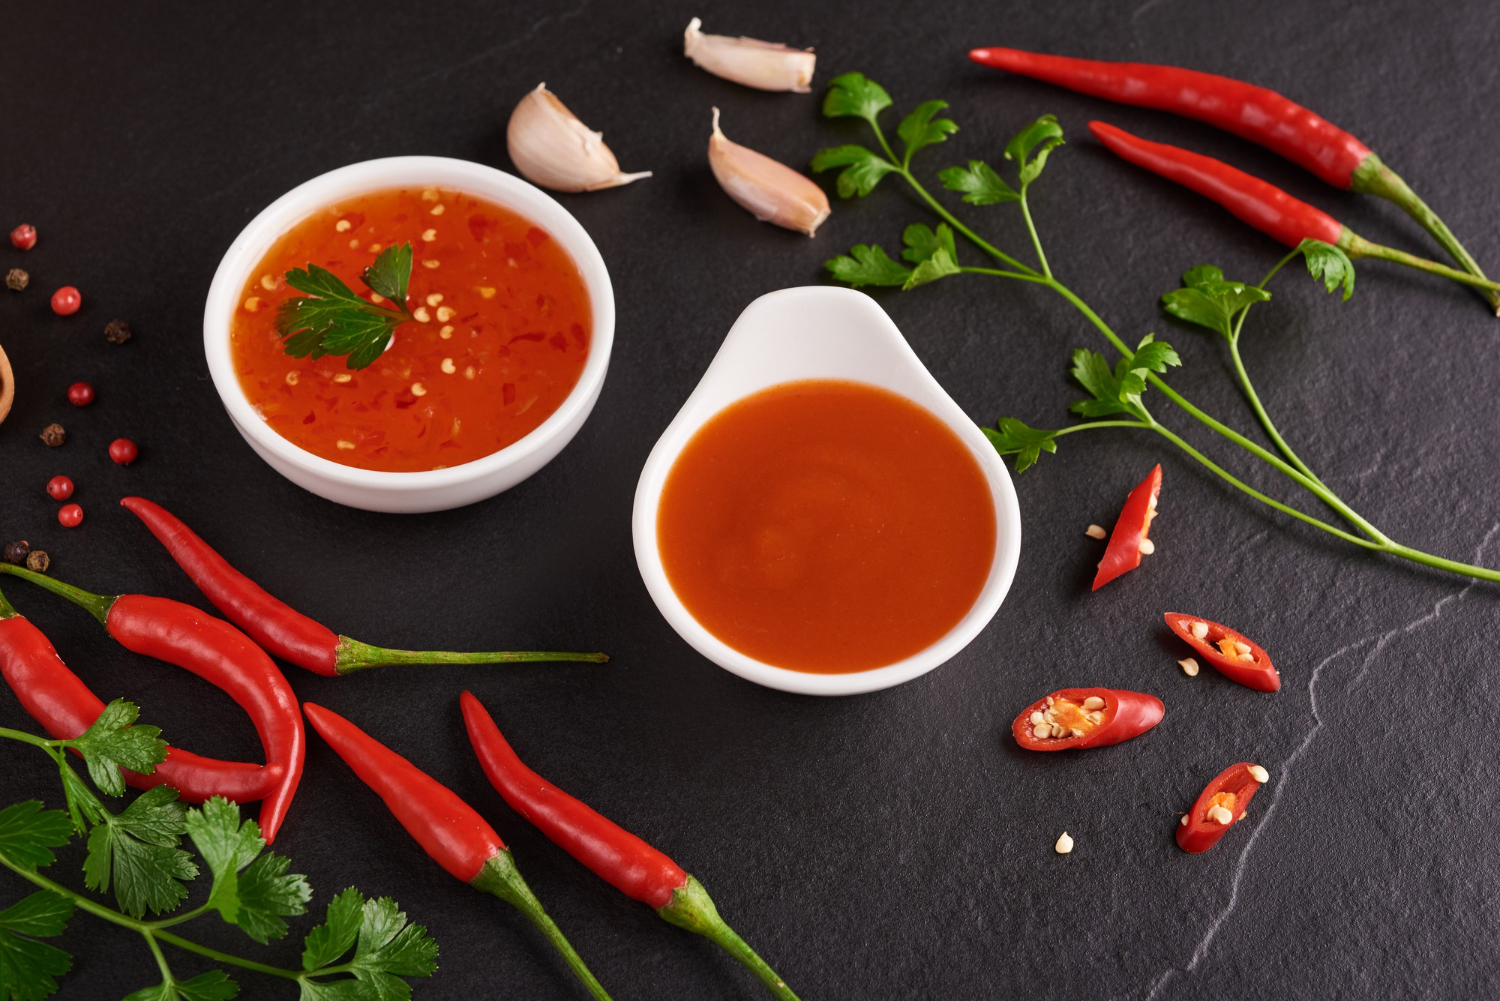 red hot chilli sauce tomato ketchup chilli sauce puree with chili pepper vegetables tomatoes garlic black stone surface top view